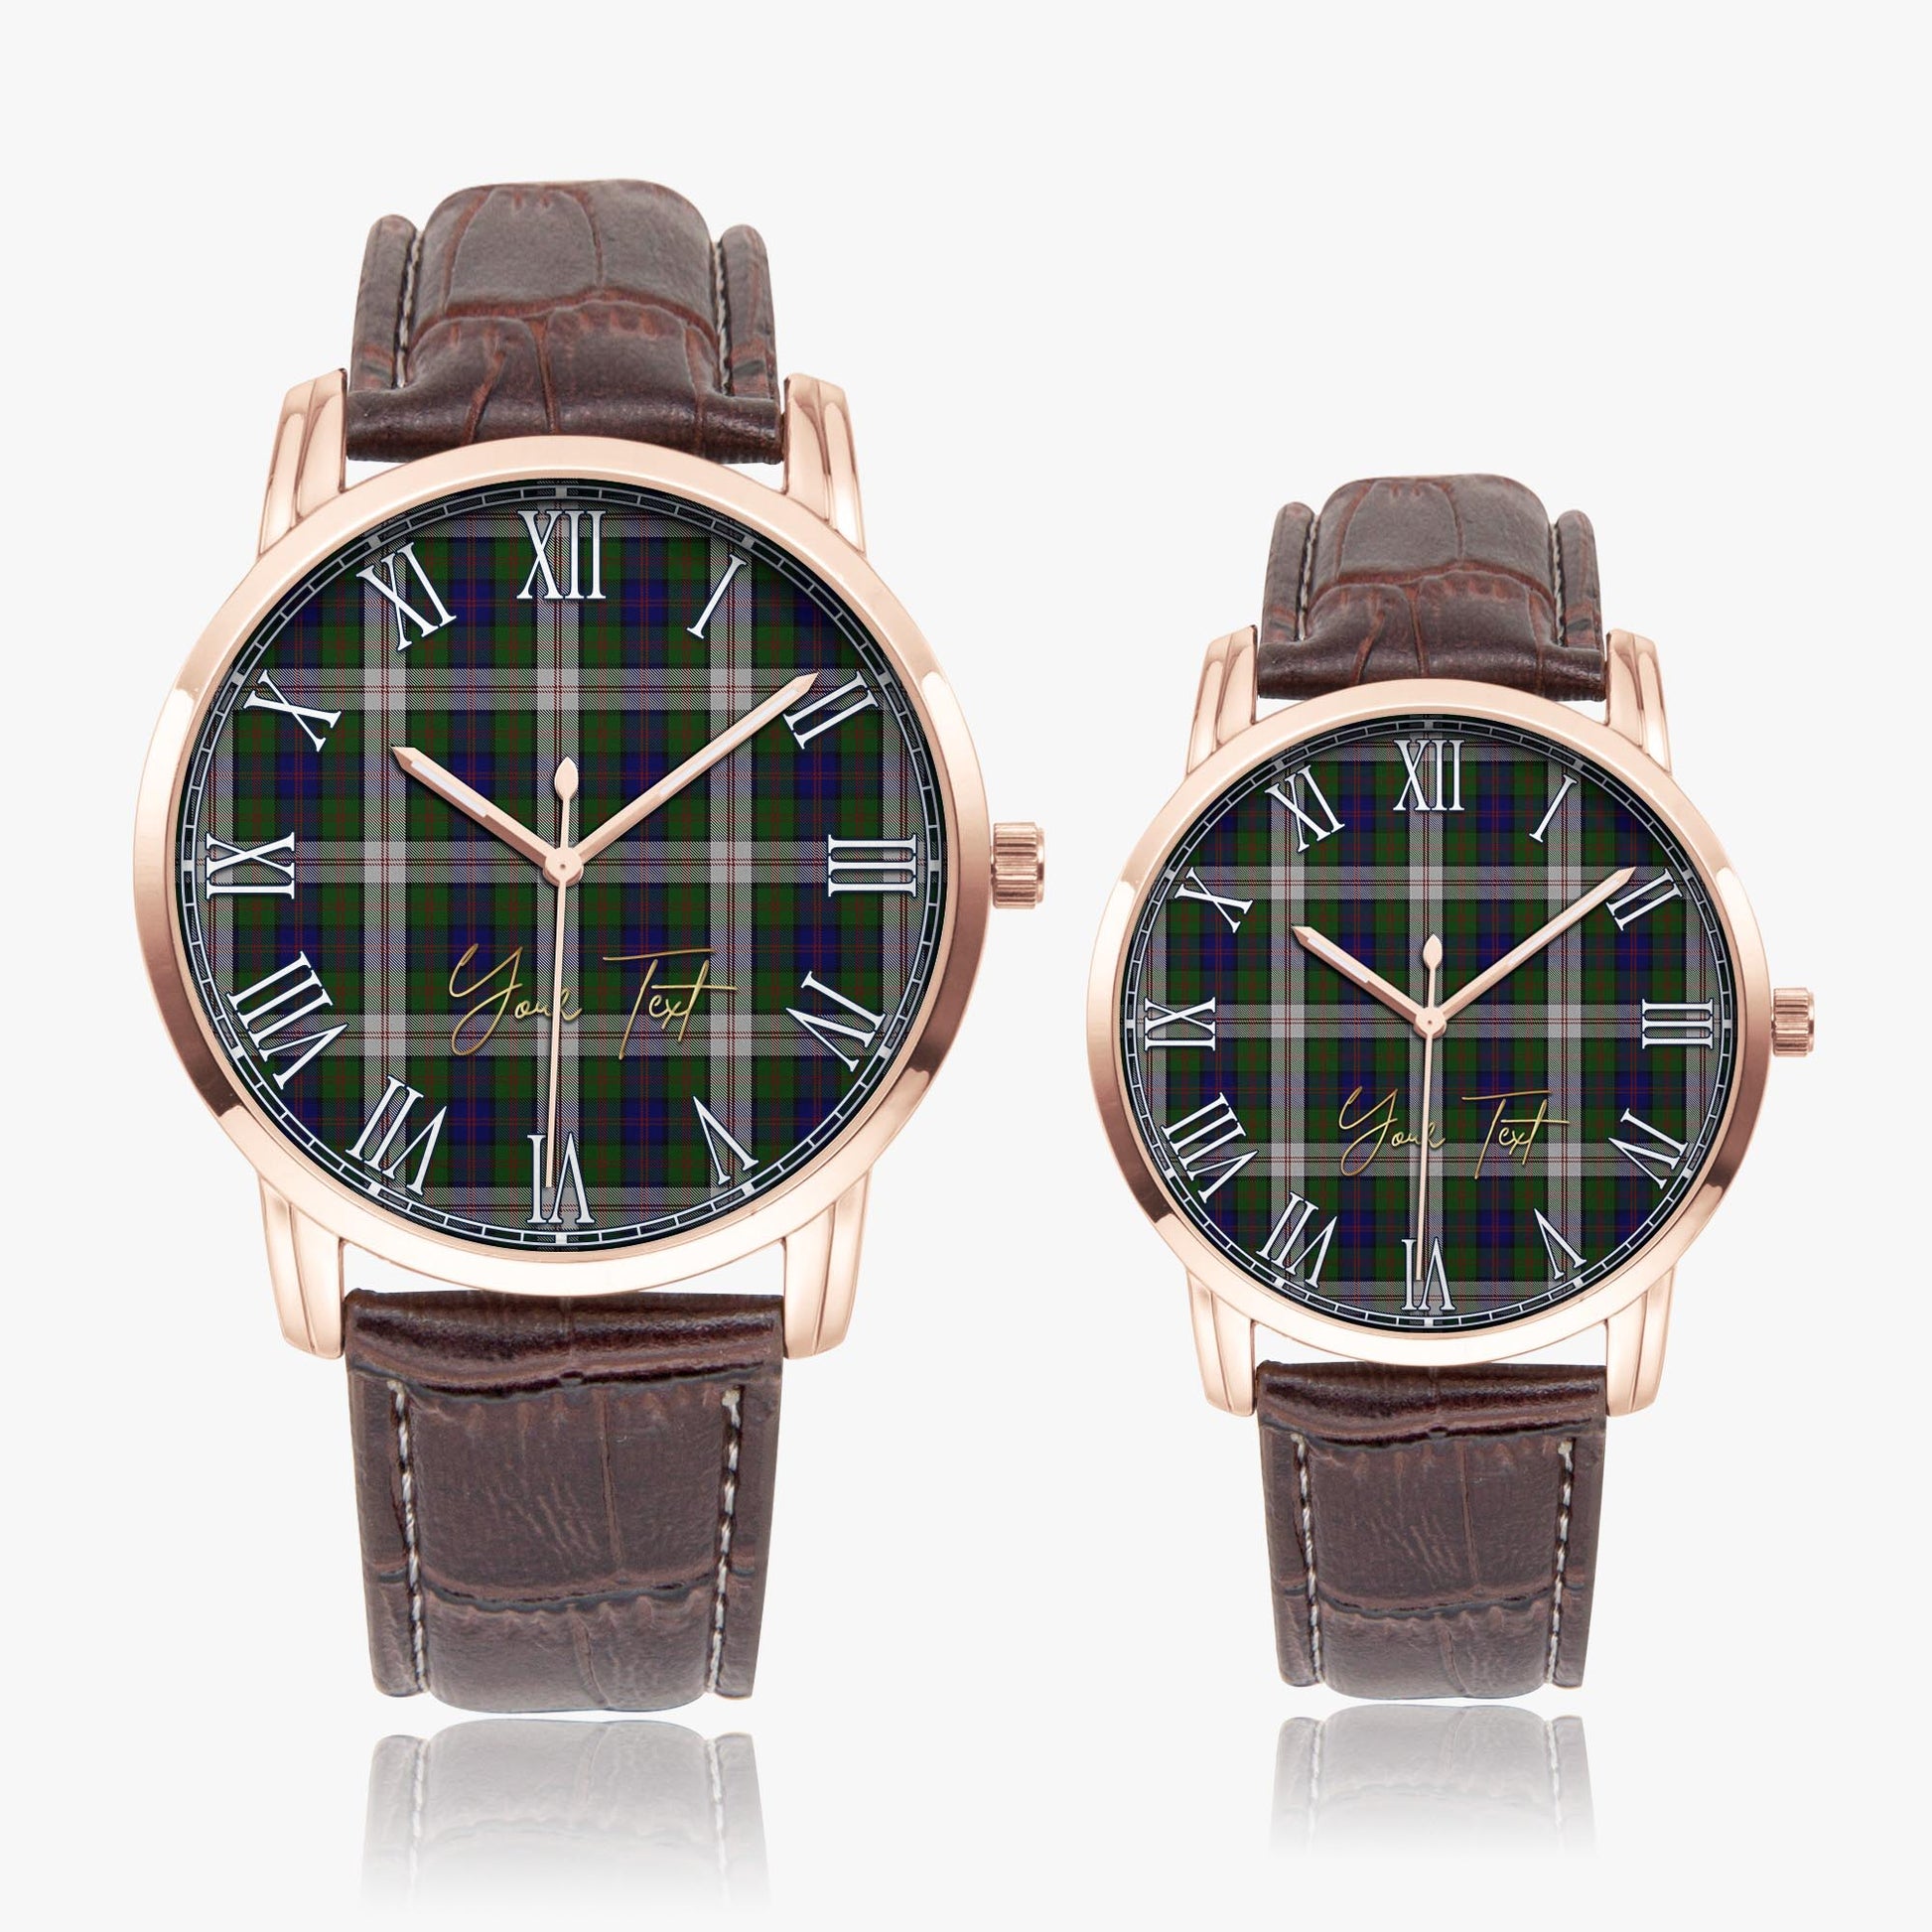 Blair Dress Tartan Personalized Your Text Leather Trap Quartz Watch Wide Type Rose Gold Case With Brown Leather Strap - Tartanvibesclothing